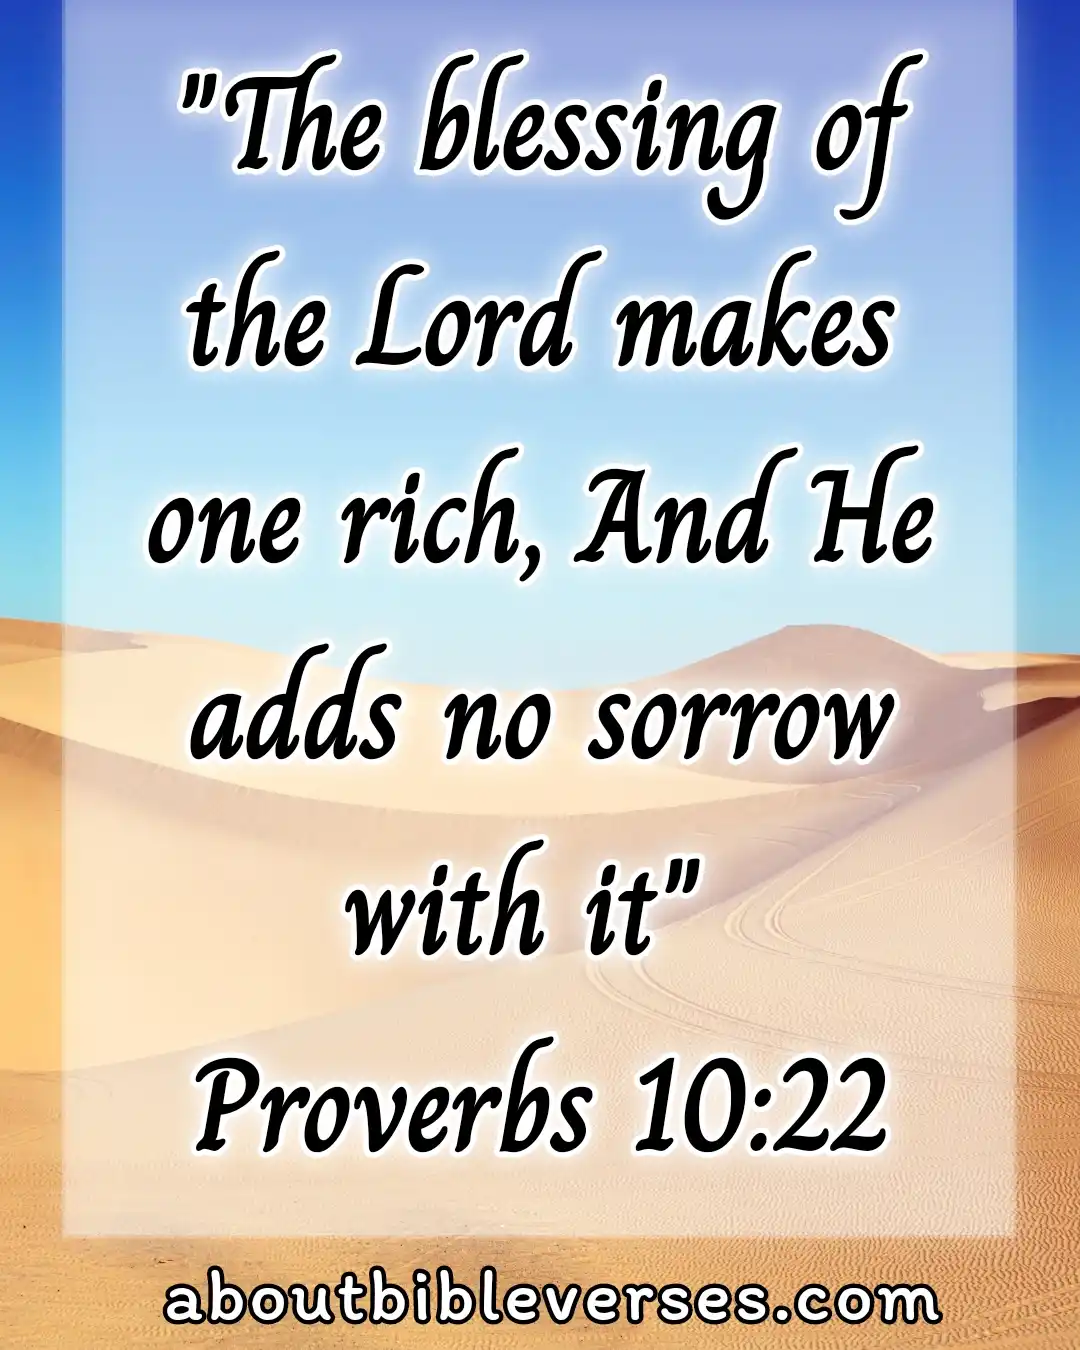 Bible Verses About Wealth And Prosperity (Proverbs 10:22)